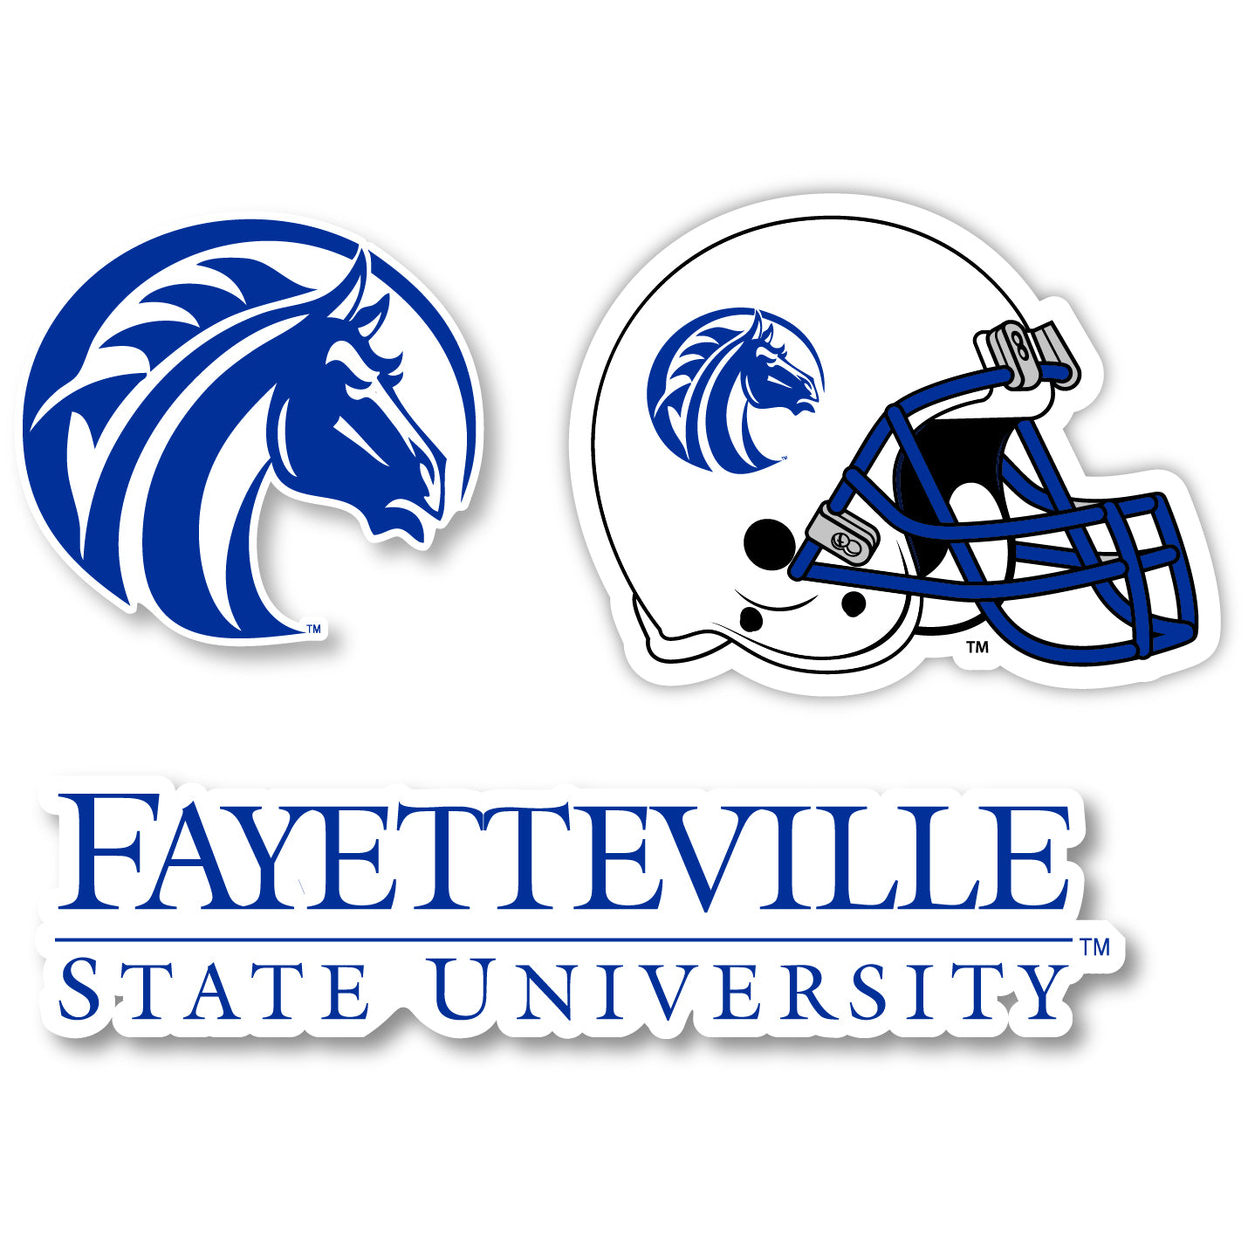 Fayetteville State University Vinyl Decal Sticker 3 Pack 4-Inch Each